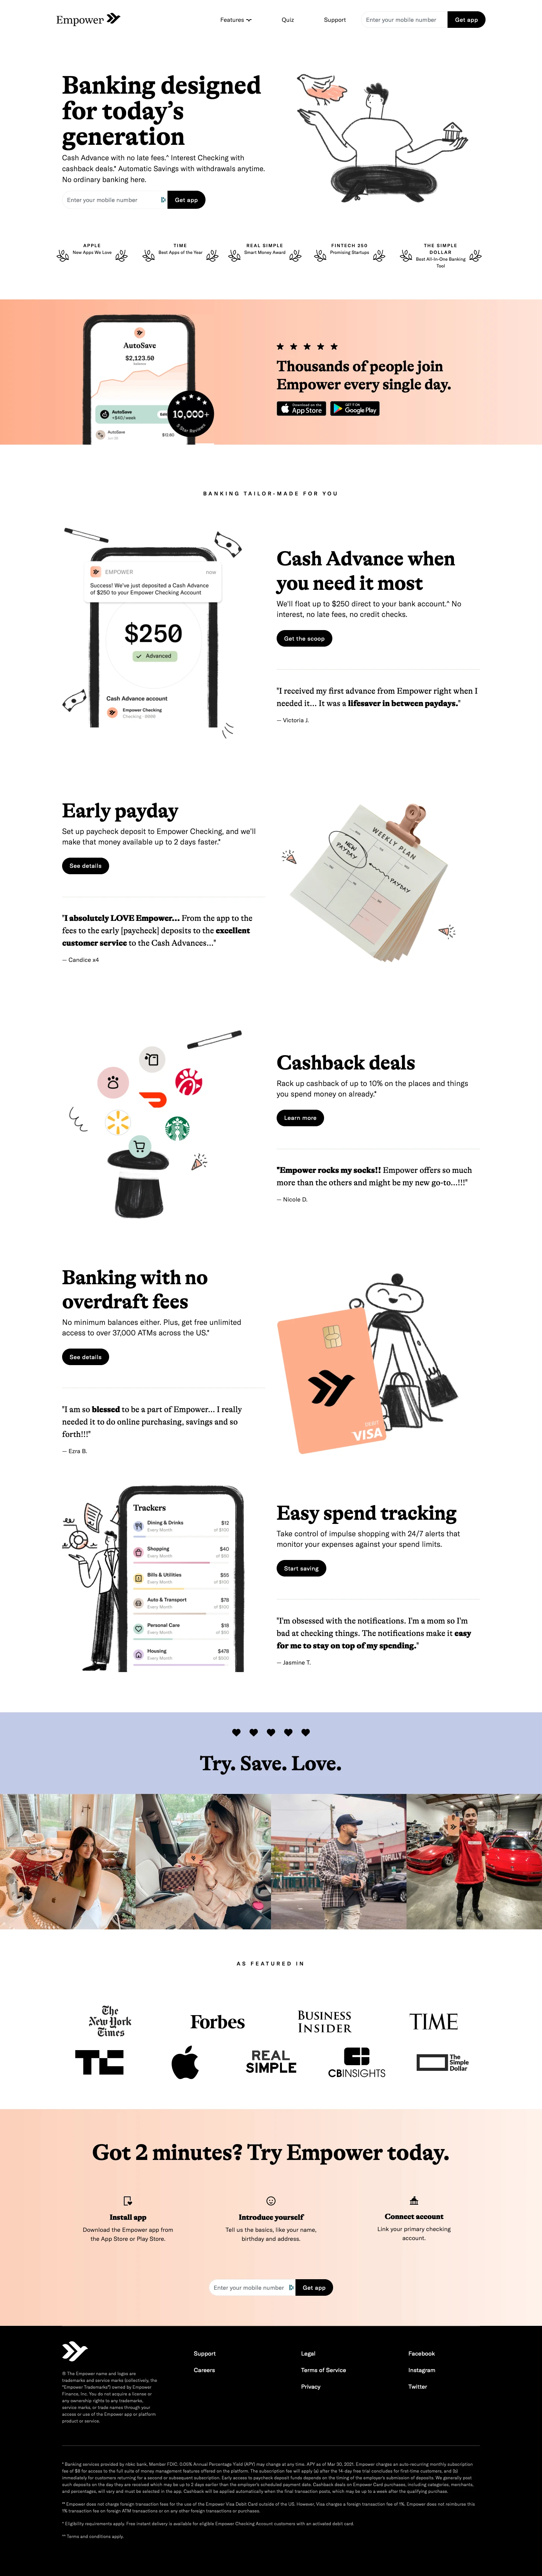 Empower Landing Page Example: Banking designed for today’s generation: Get cash instantly. Spend mindfully. Save automatically.